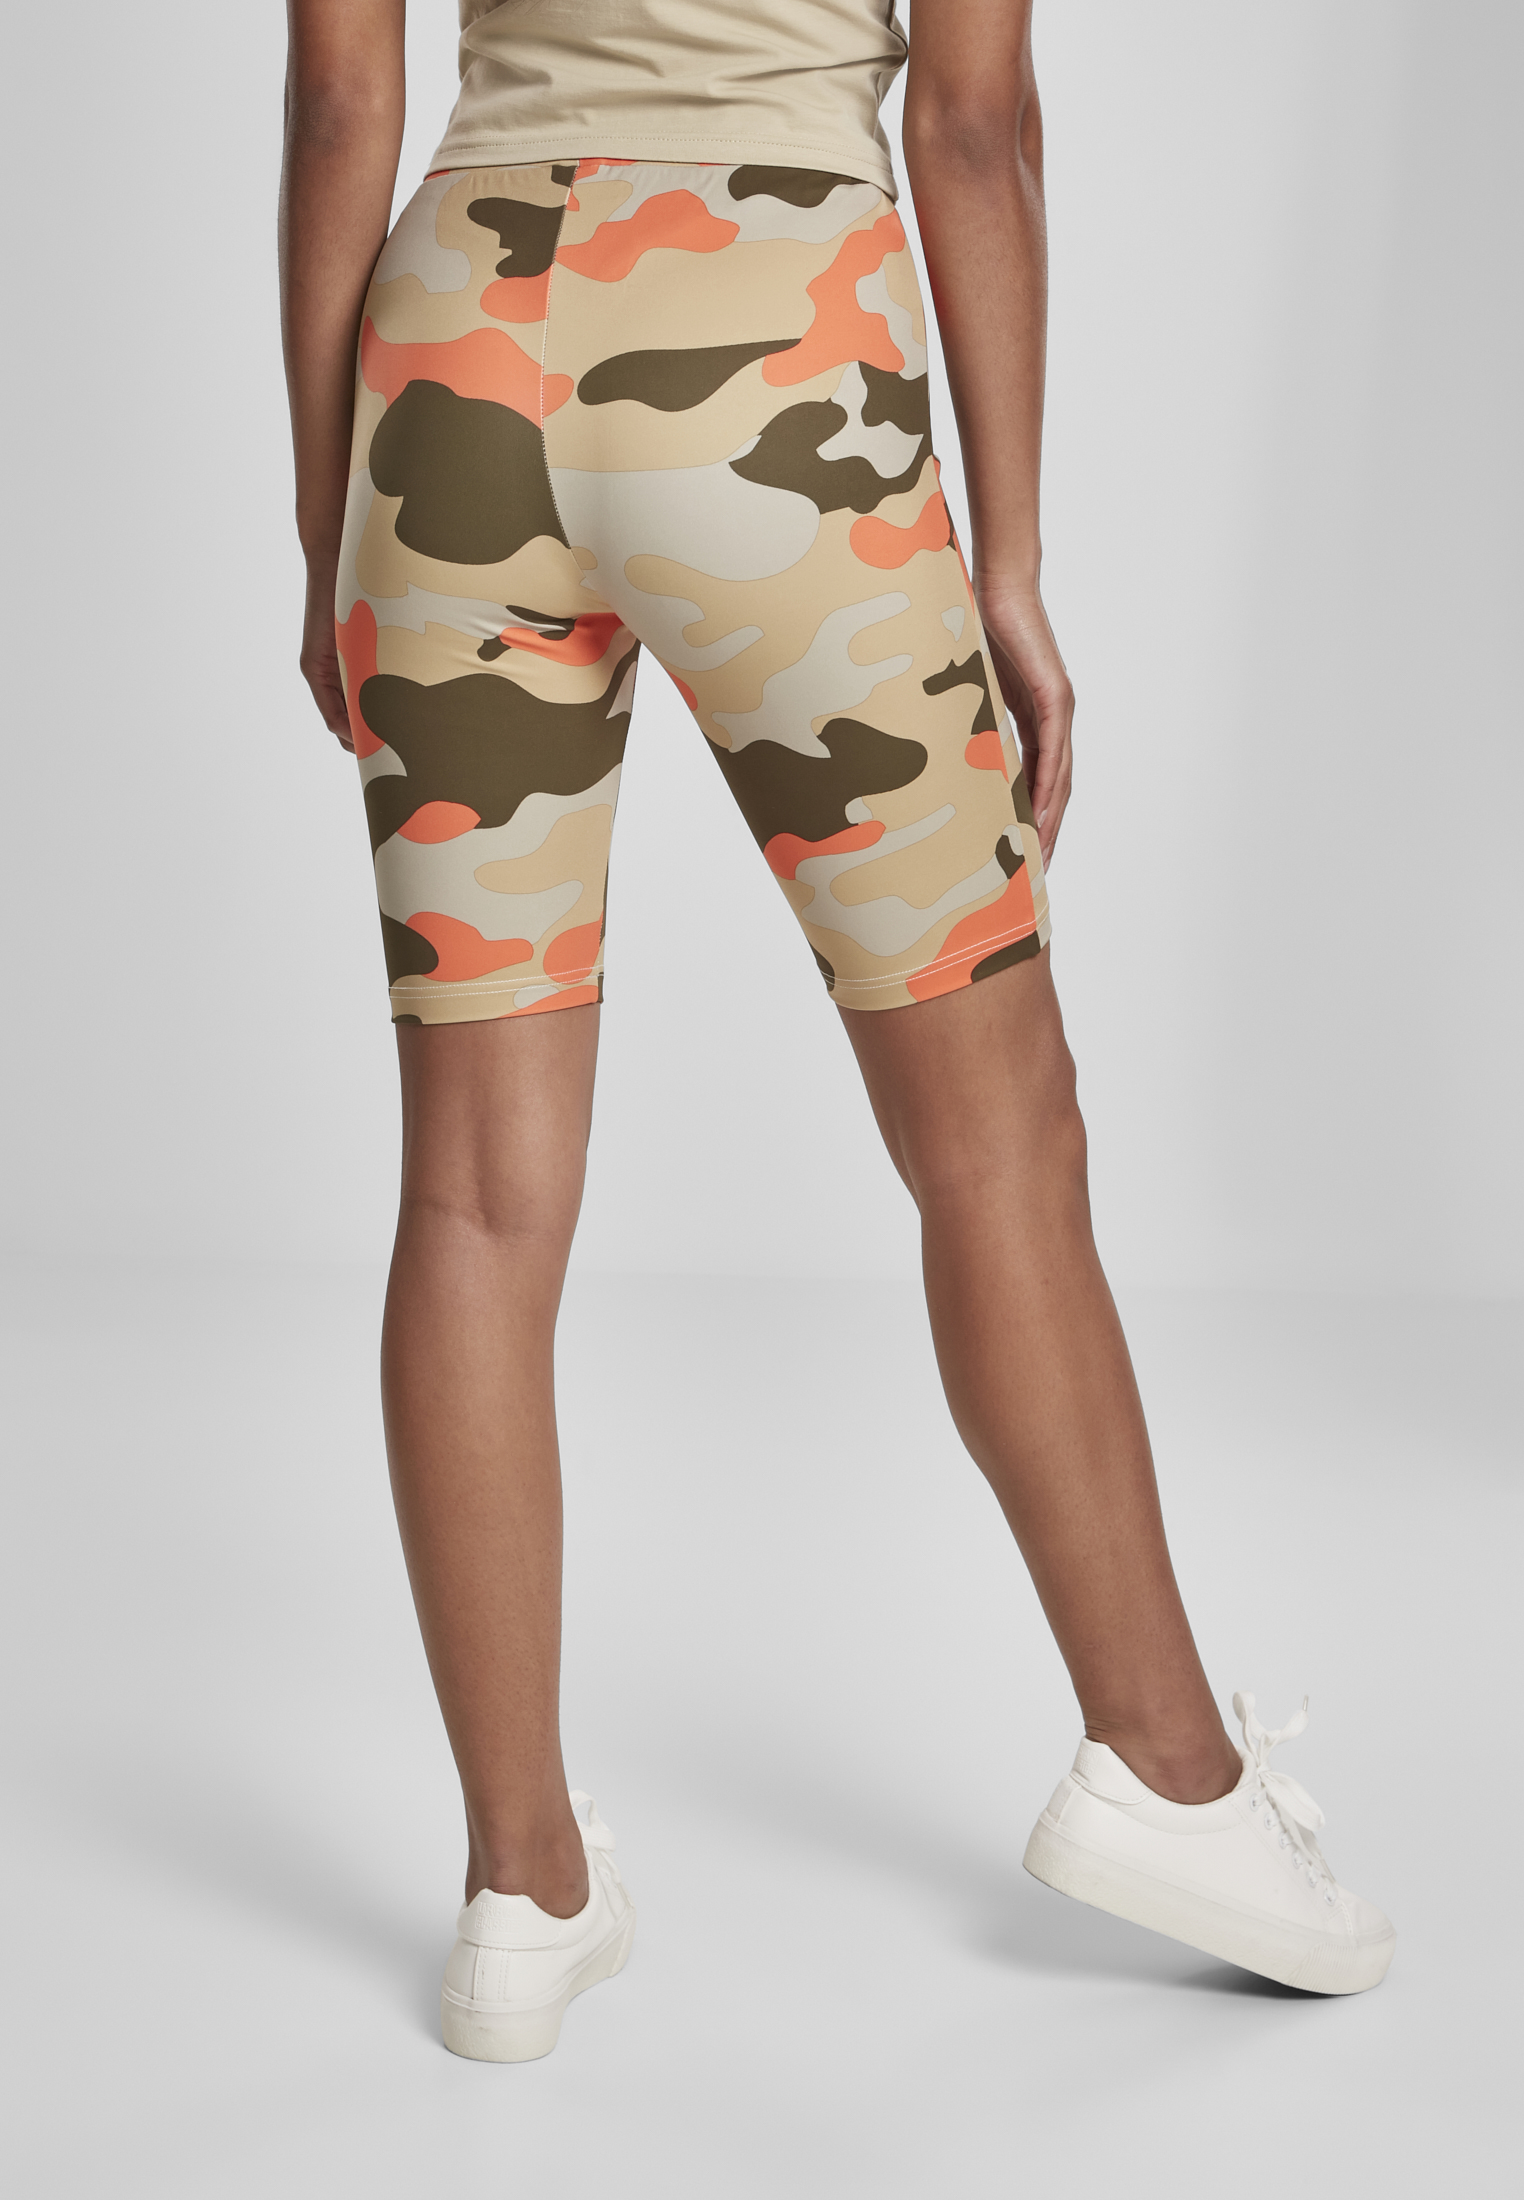 Bekleidung Ladies High Waist Camo Tech Cycle Shorts Double Pack in Farbe brick camo/olive